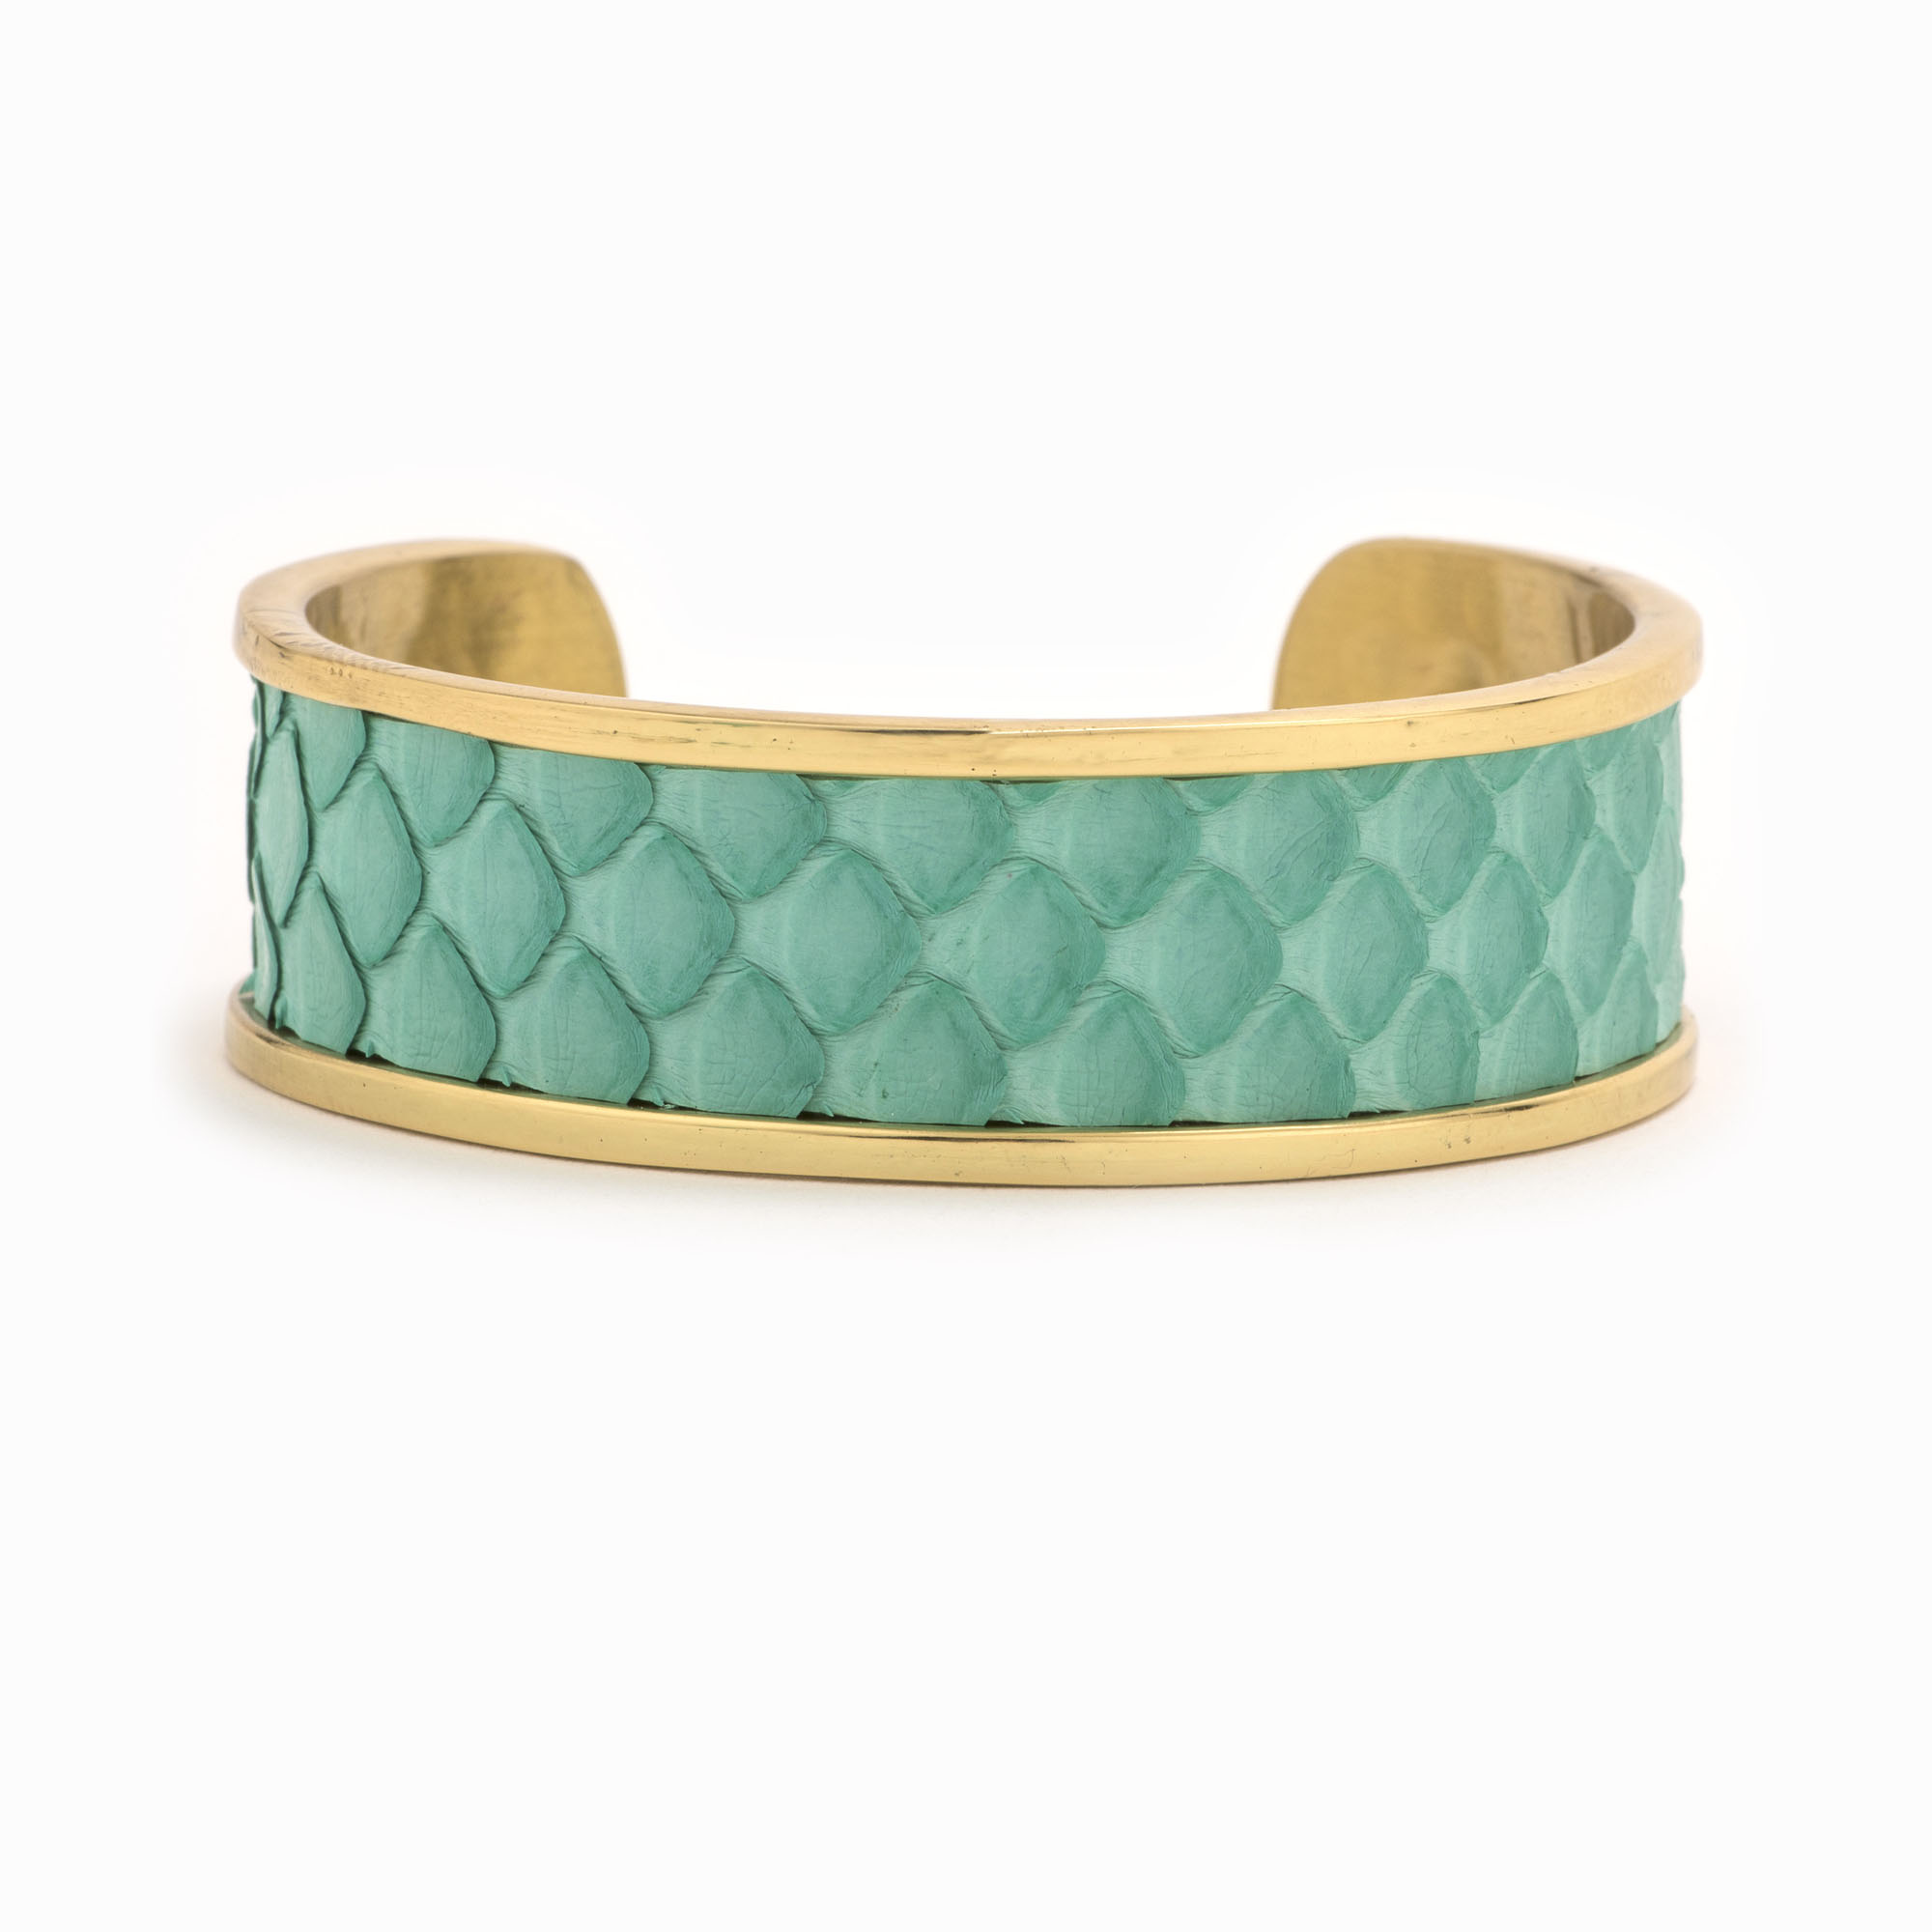 Featured image for “Medium Turquoise Gold Cuff”